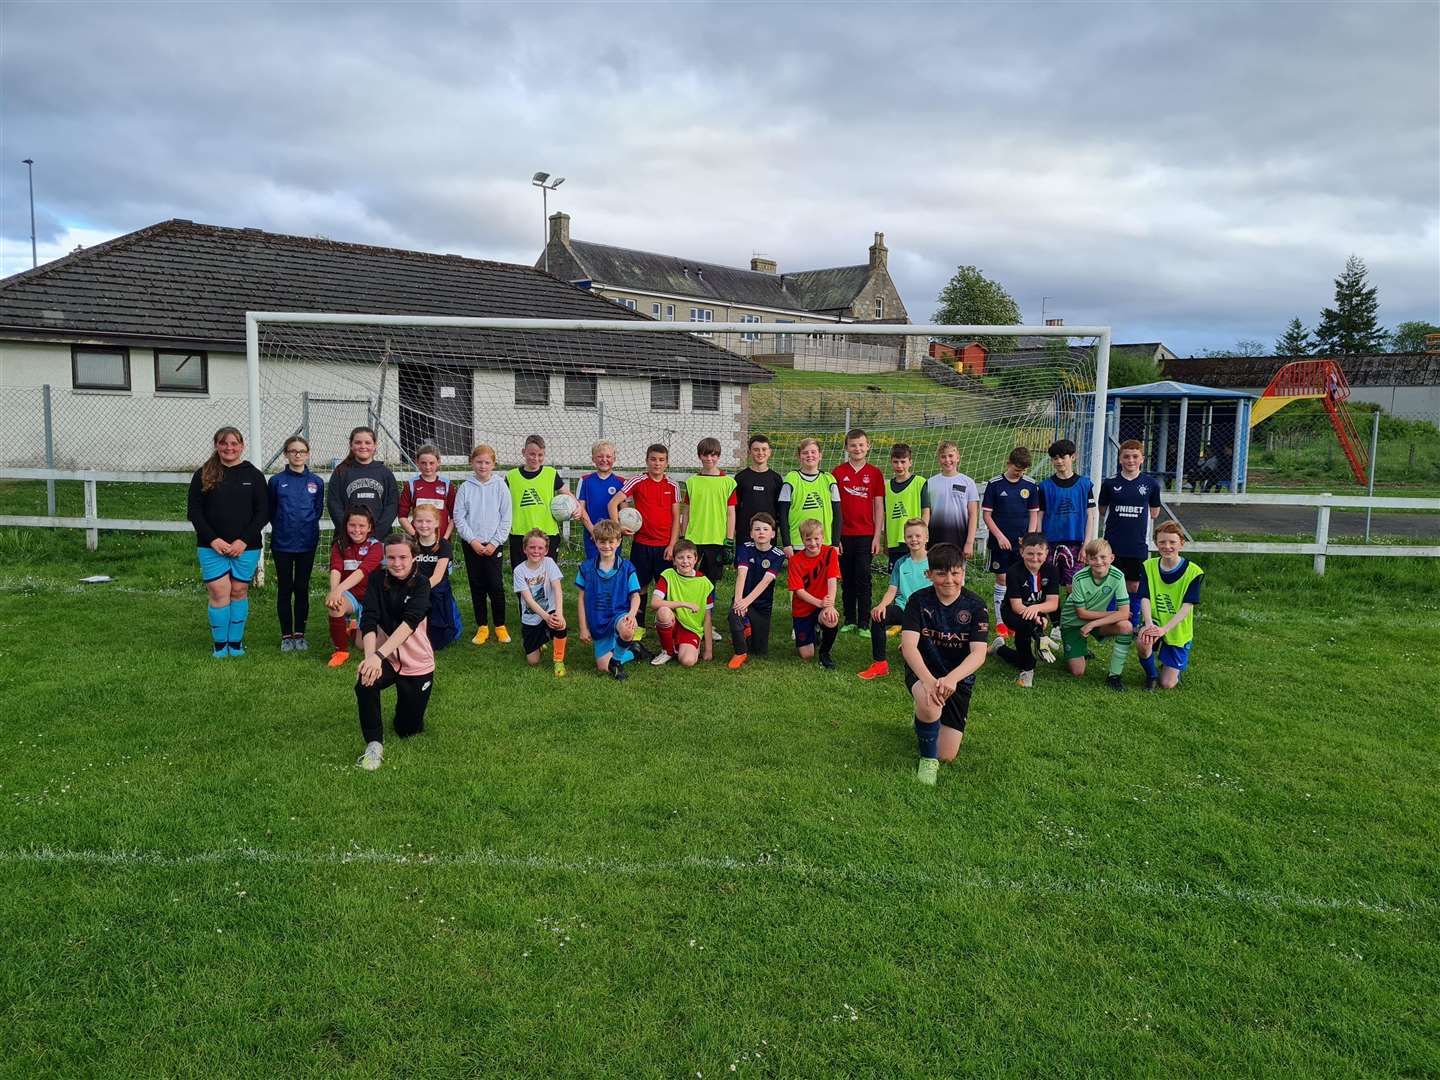 Strathspey Rovers and Strathspey Girls at Cromdale Park. Out front is Aliyah Ligertwood, Strathspey Girls captain and Strathspey Rovers captain, Ralfs Peca.